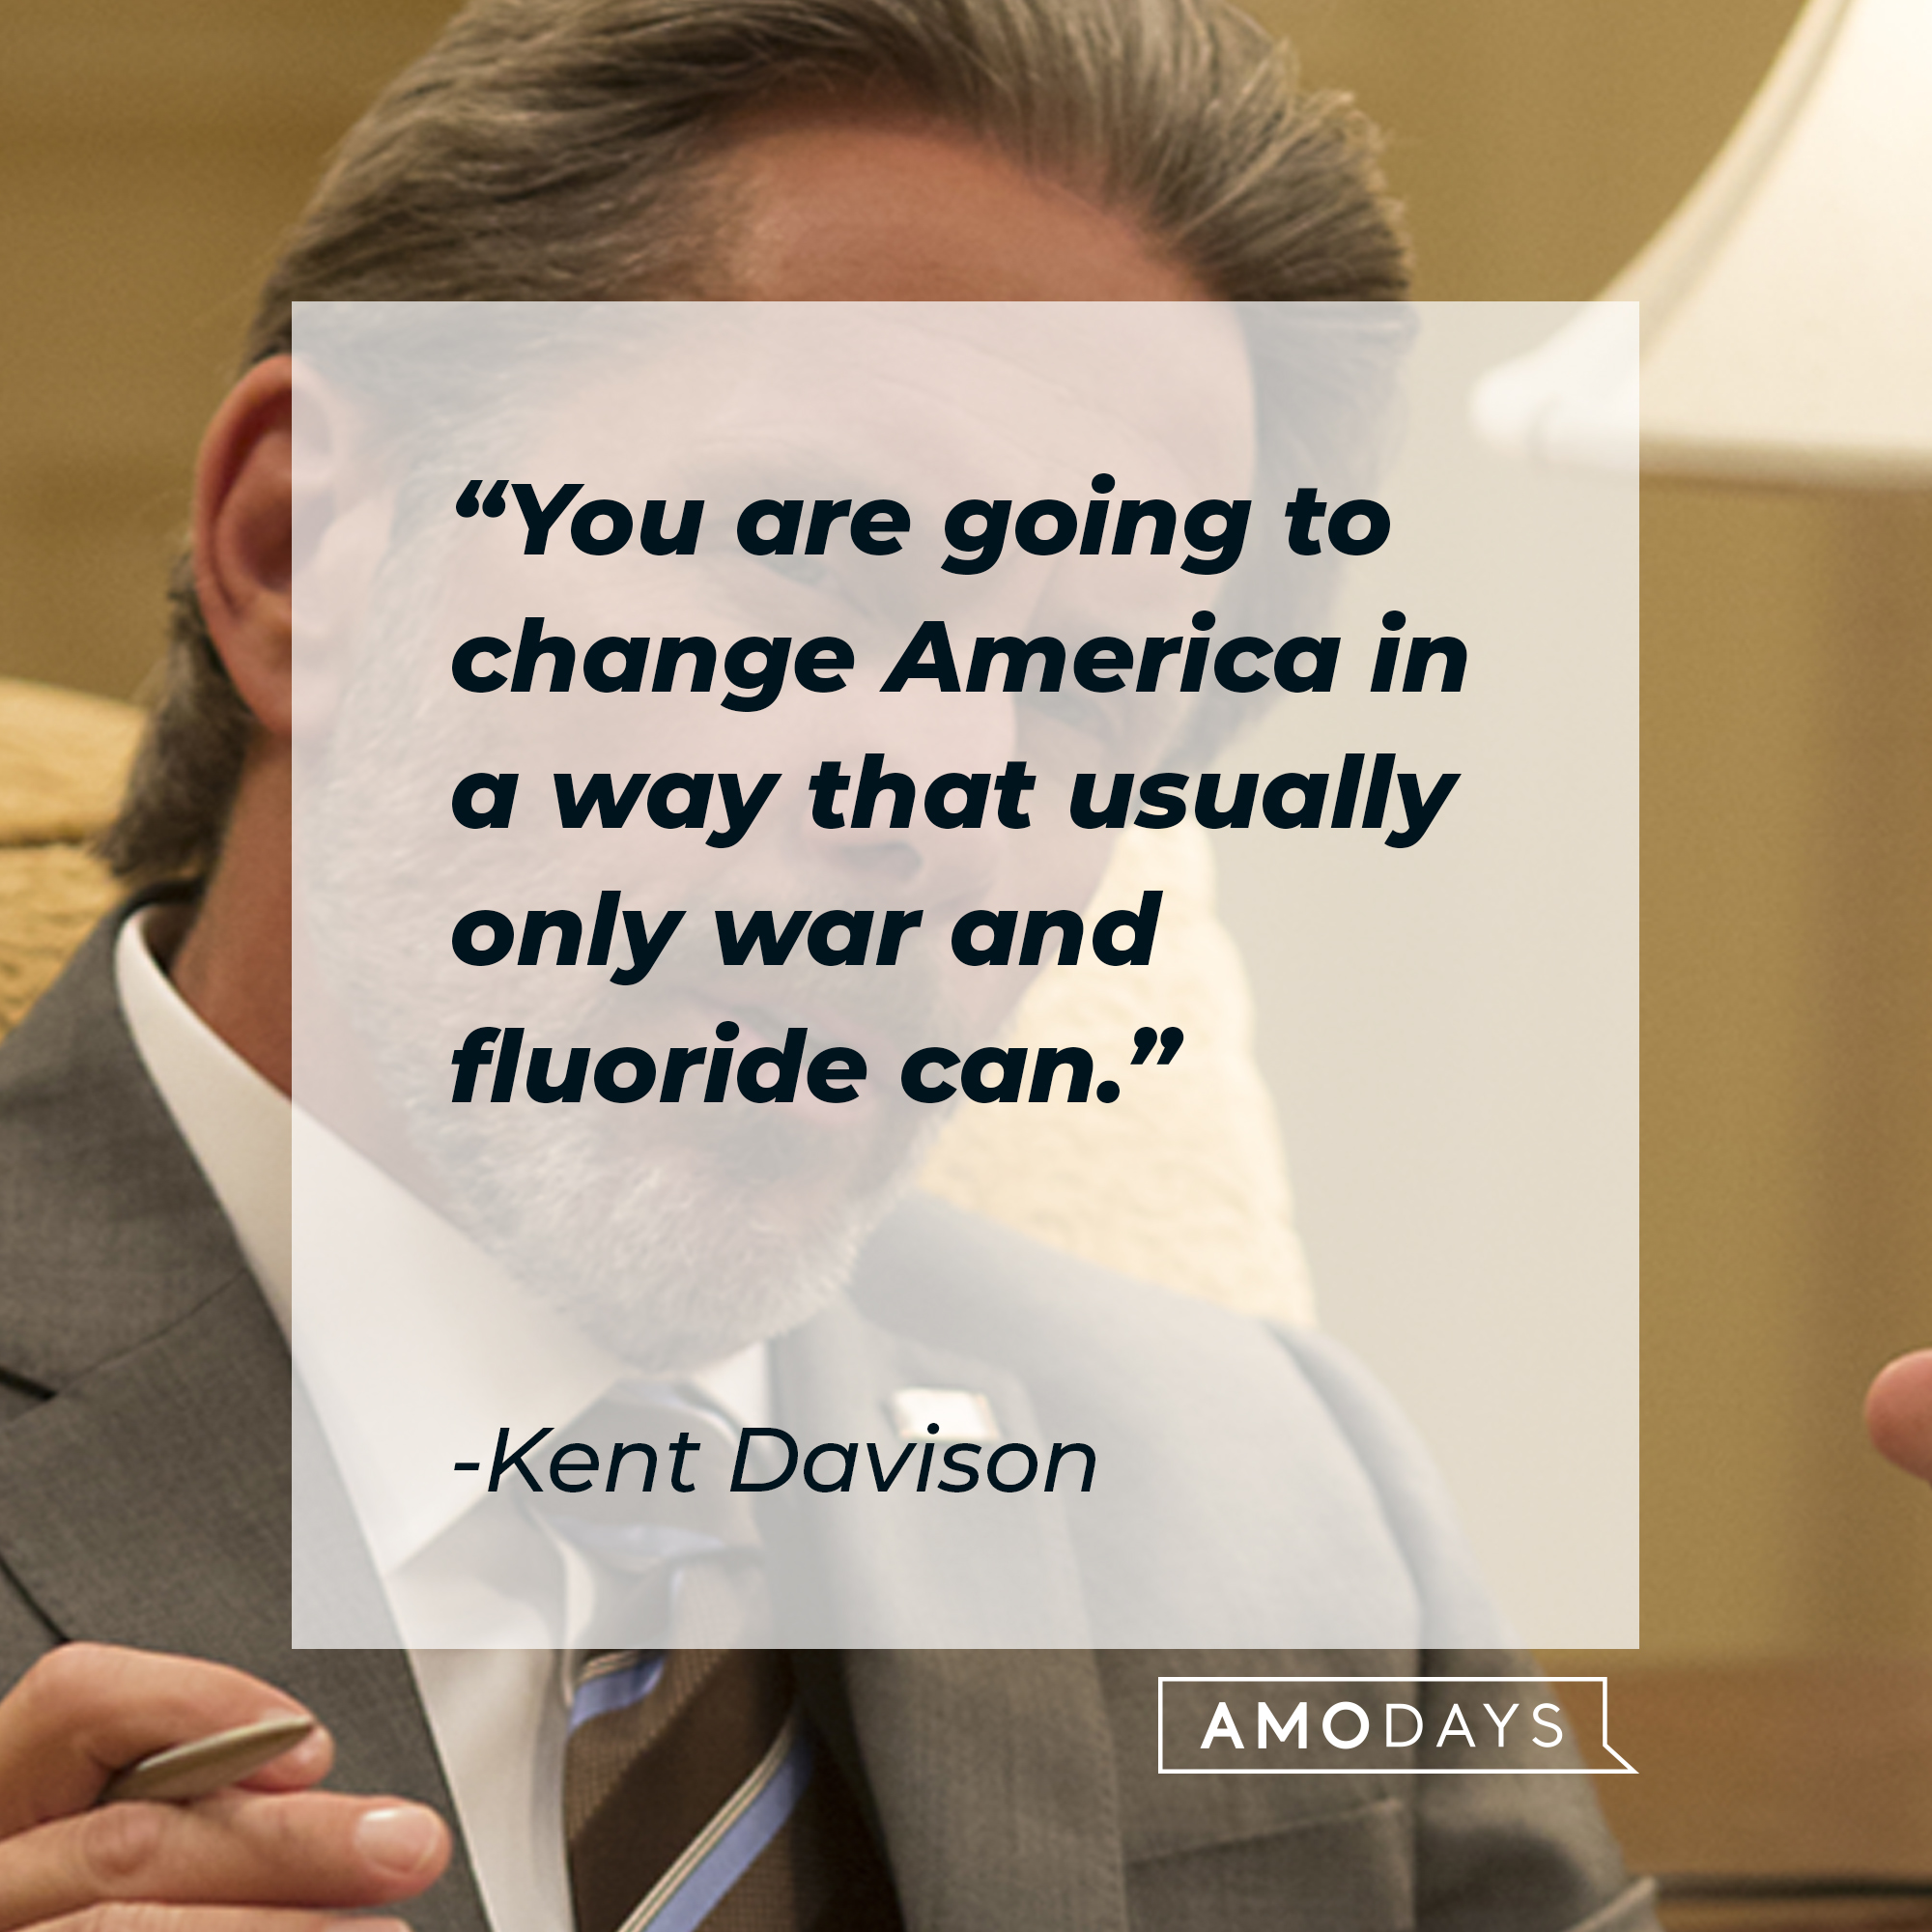 Kent Davison, with his quote: "You are going to change America in a way that usually only war and fluoride can." | Source: Facebook.com/veep